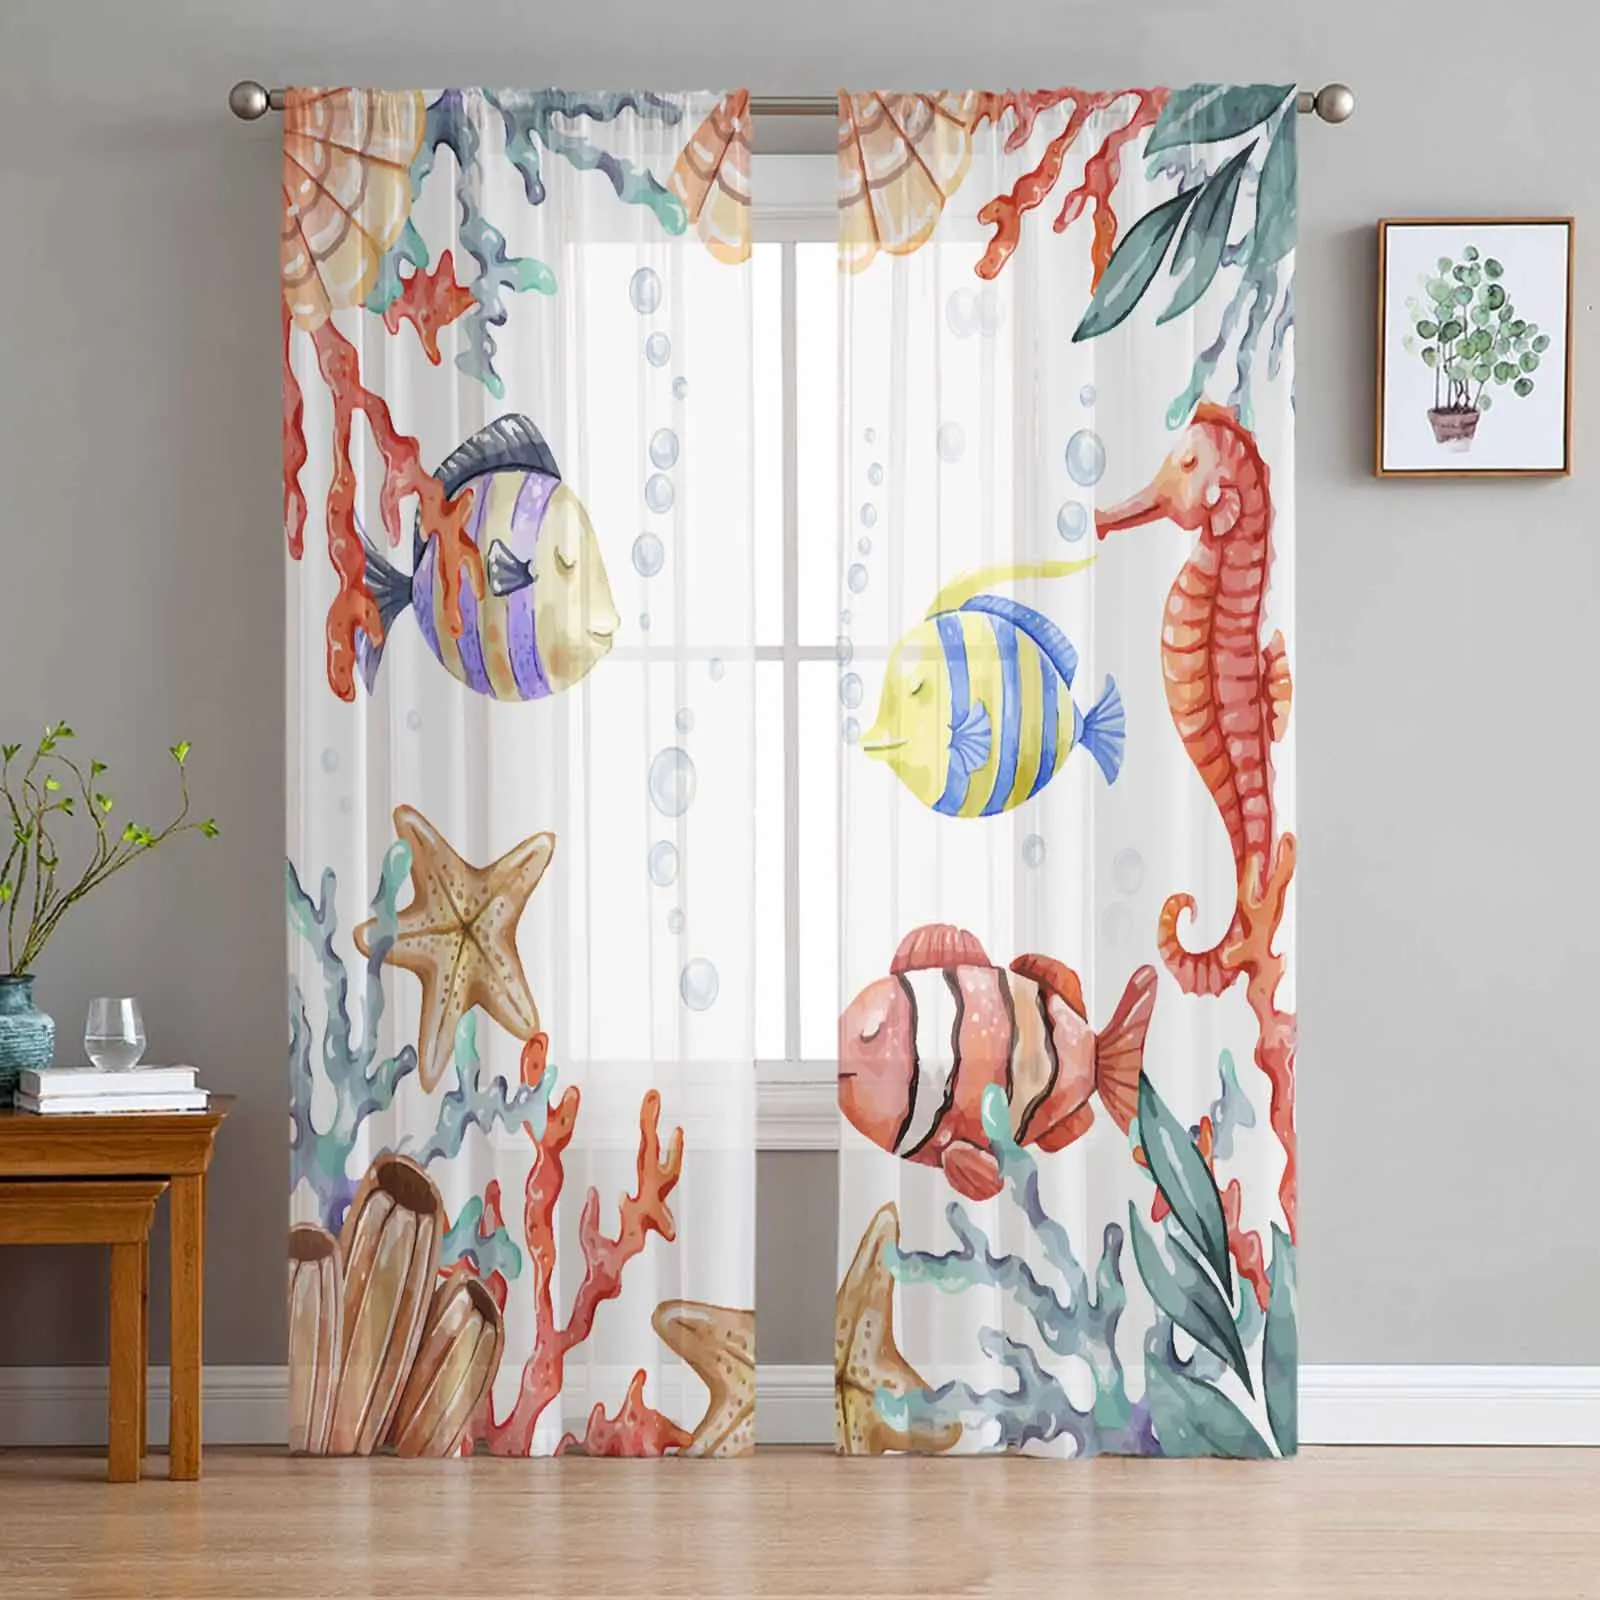 

Ocean Coral Fish Watercolor Tulle Curtains for Living Room Sheer Curtain for Bedroom Kitchen Blinds Voile Curtains